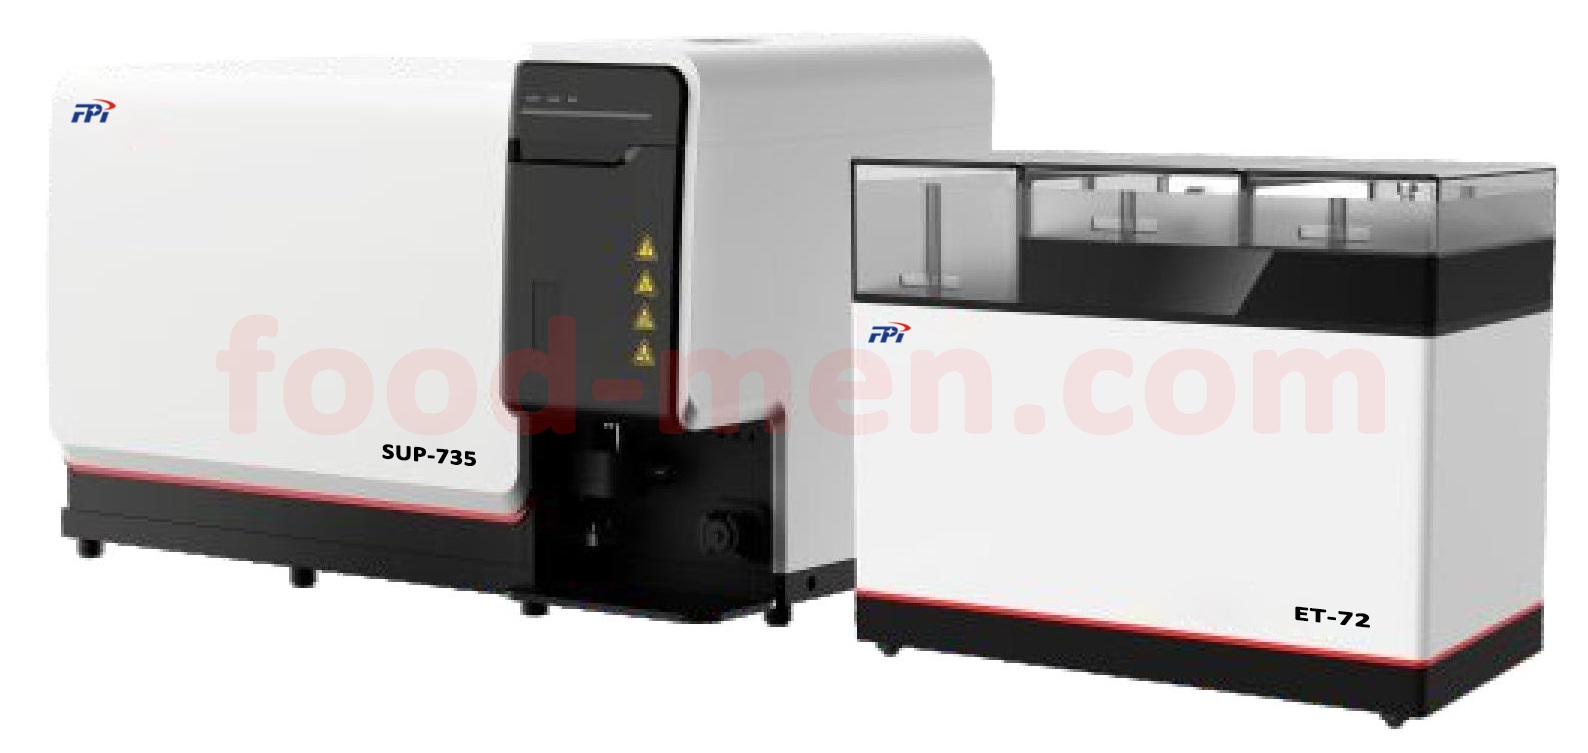 SUP-735 Inductively Coupled Plasma-Mass Spectrometer (ICP-MS /MS or ICP-QQQ)23-Solid Direct Sampling-ICP-MS Hybrid System